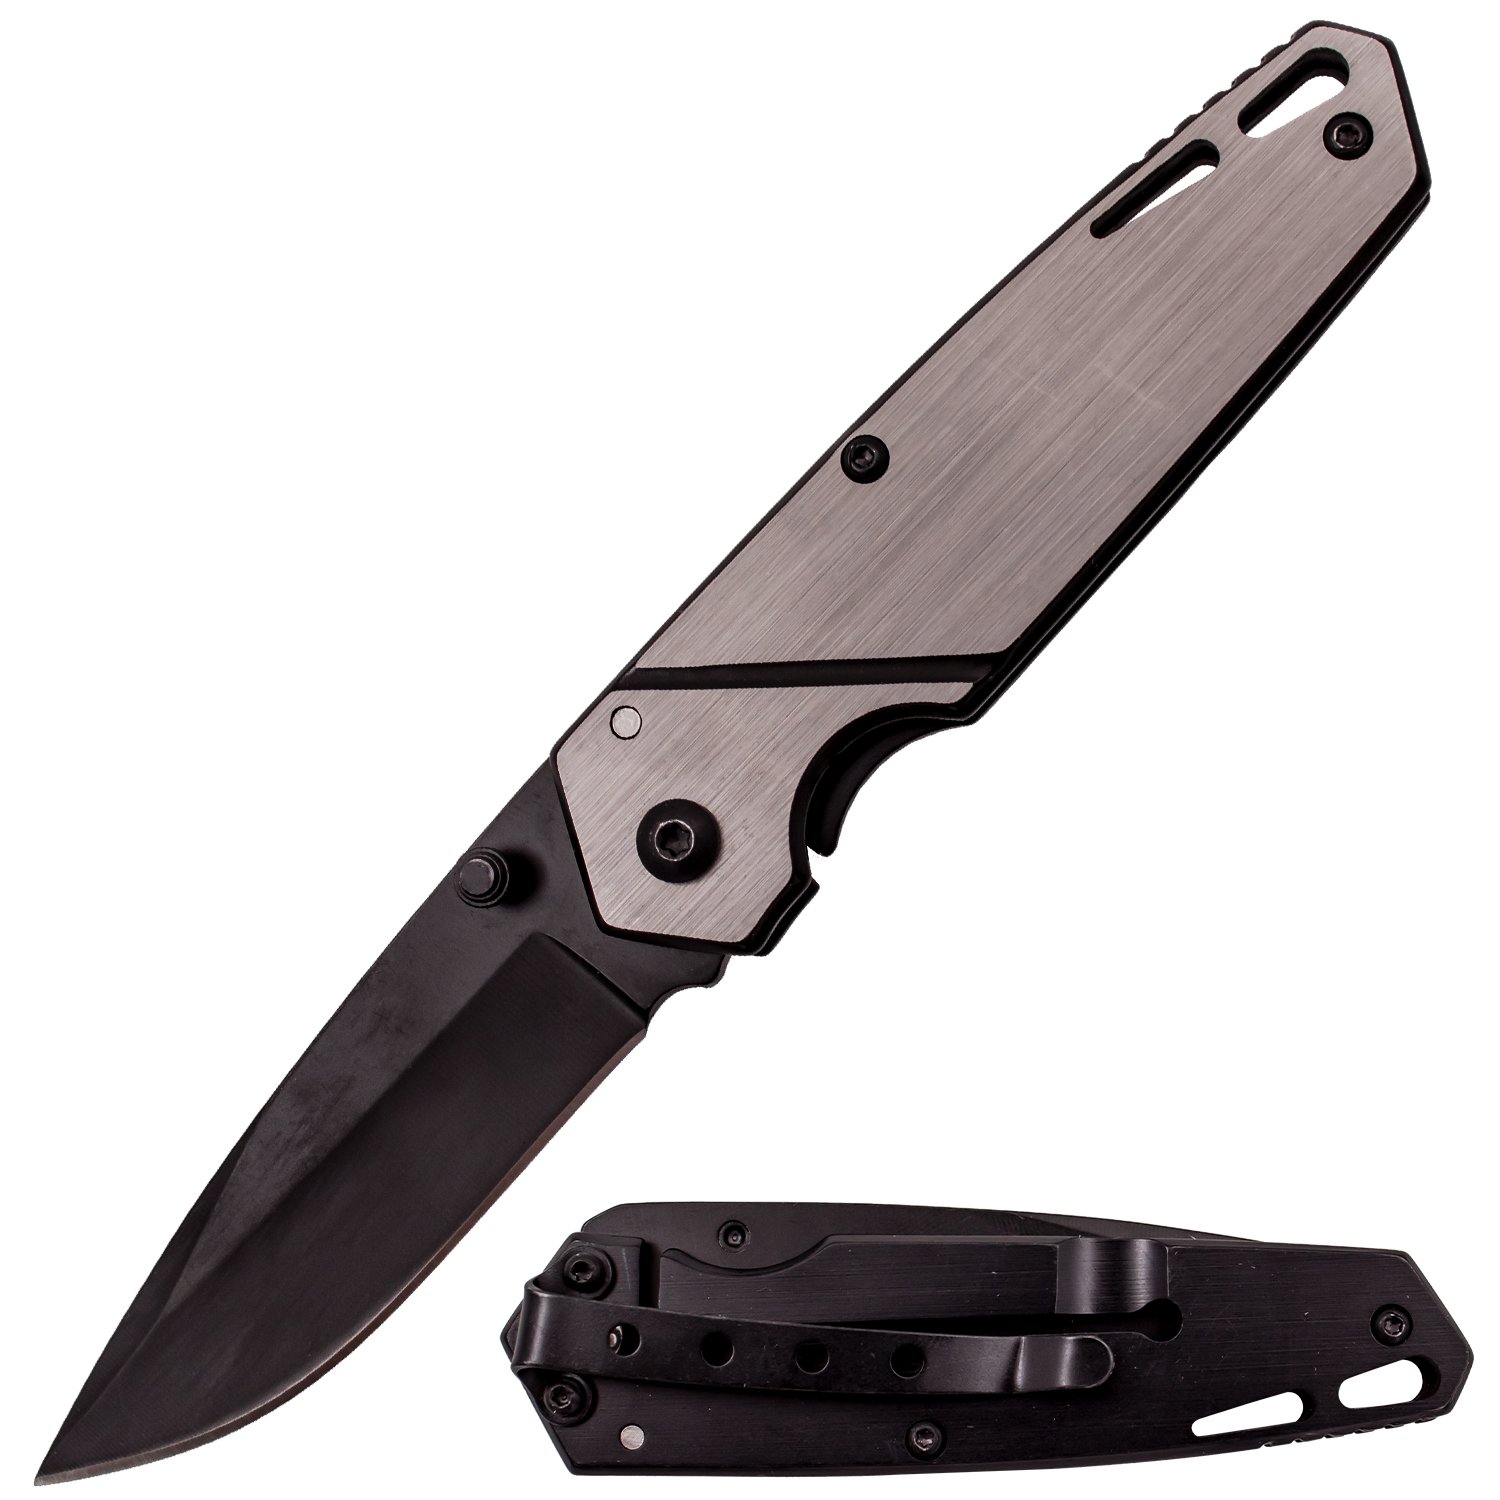 6 Inch MANUAL Folding Knife Stainless Steel Handle